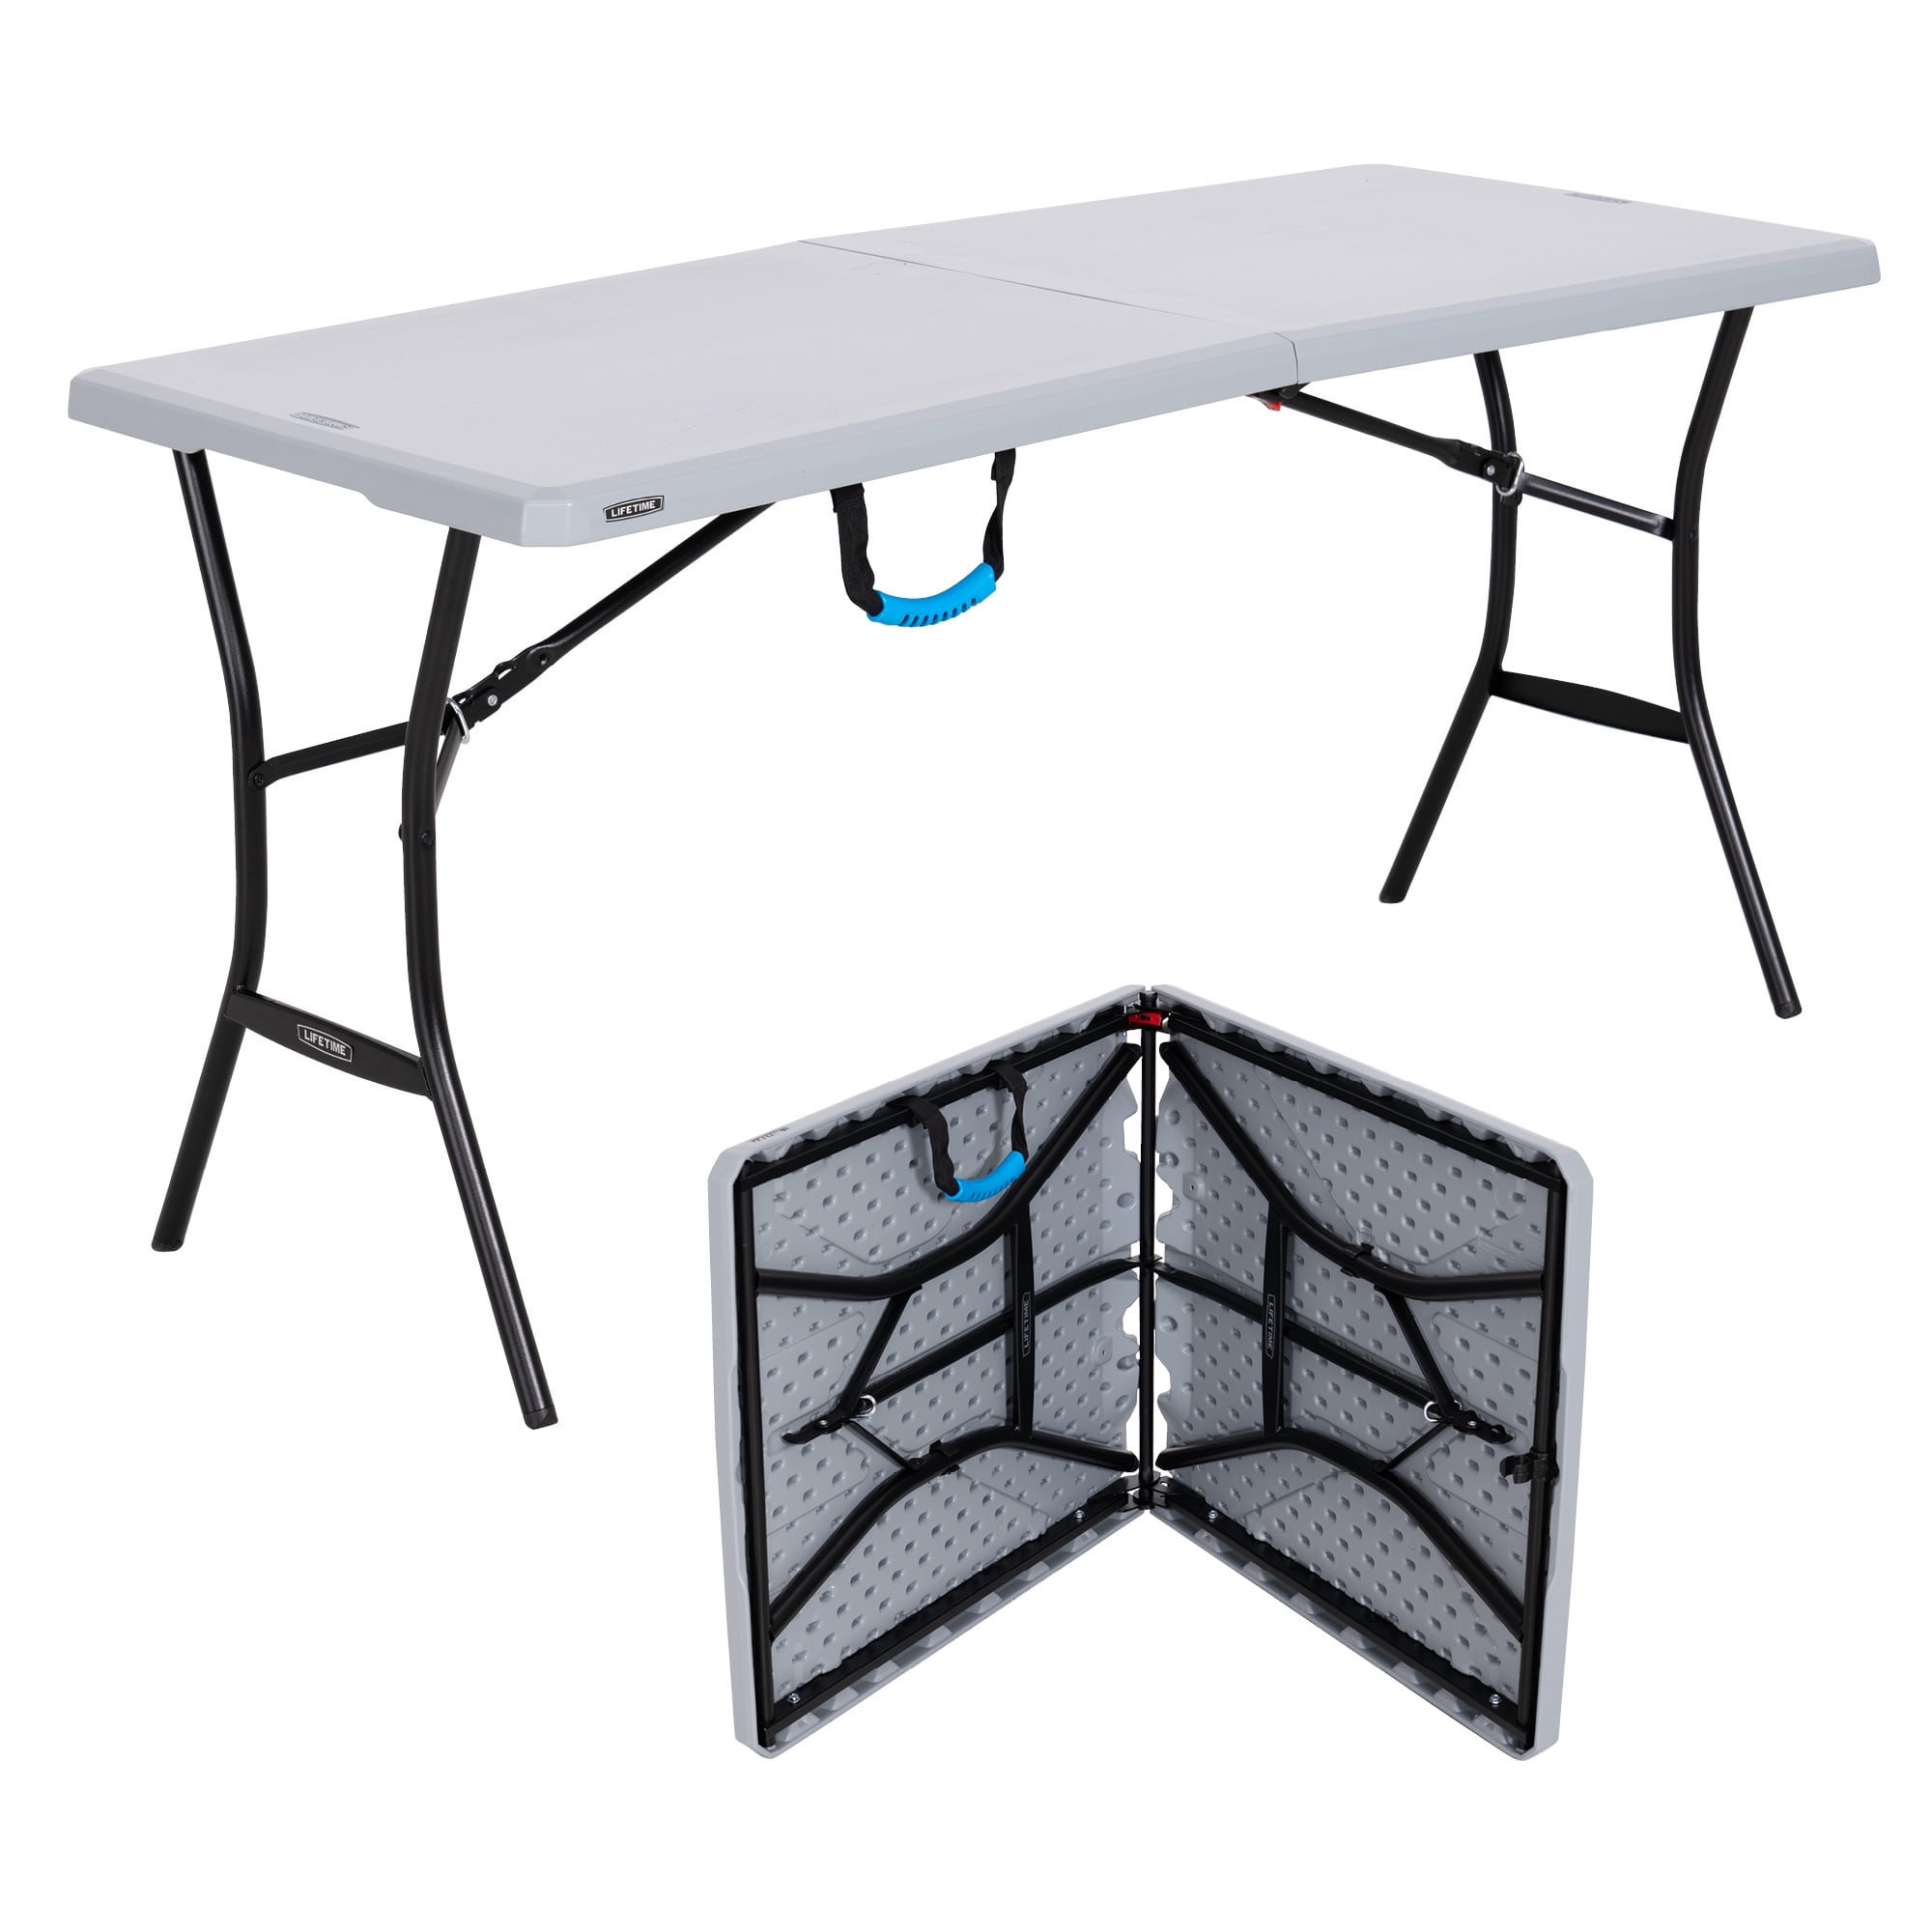 5' Lifetime Folding Tailgating Camping & Outdoor Table (Gray) $44.98 + Free Shipping